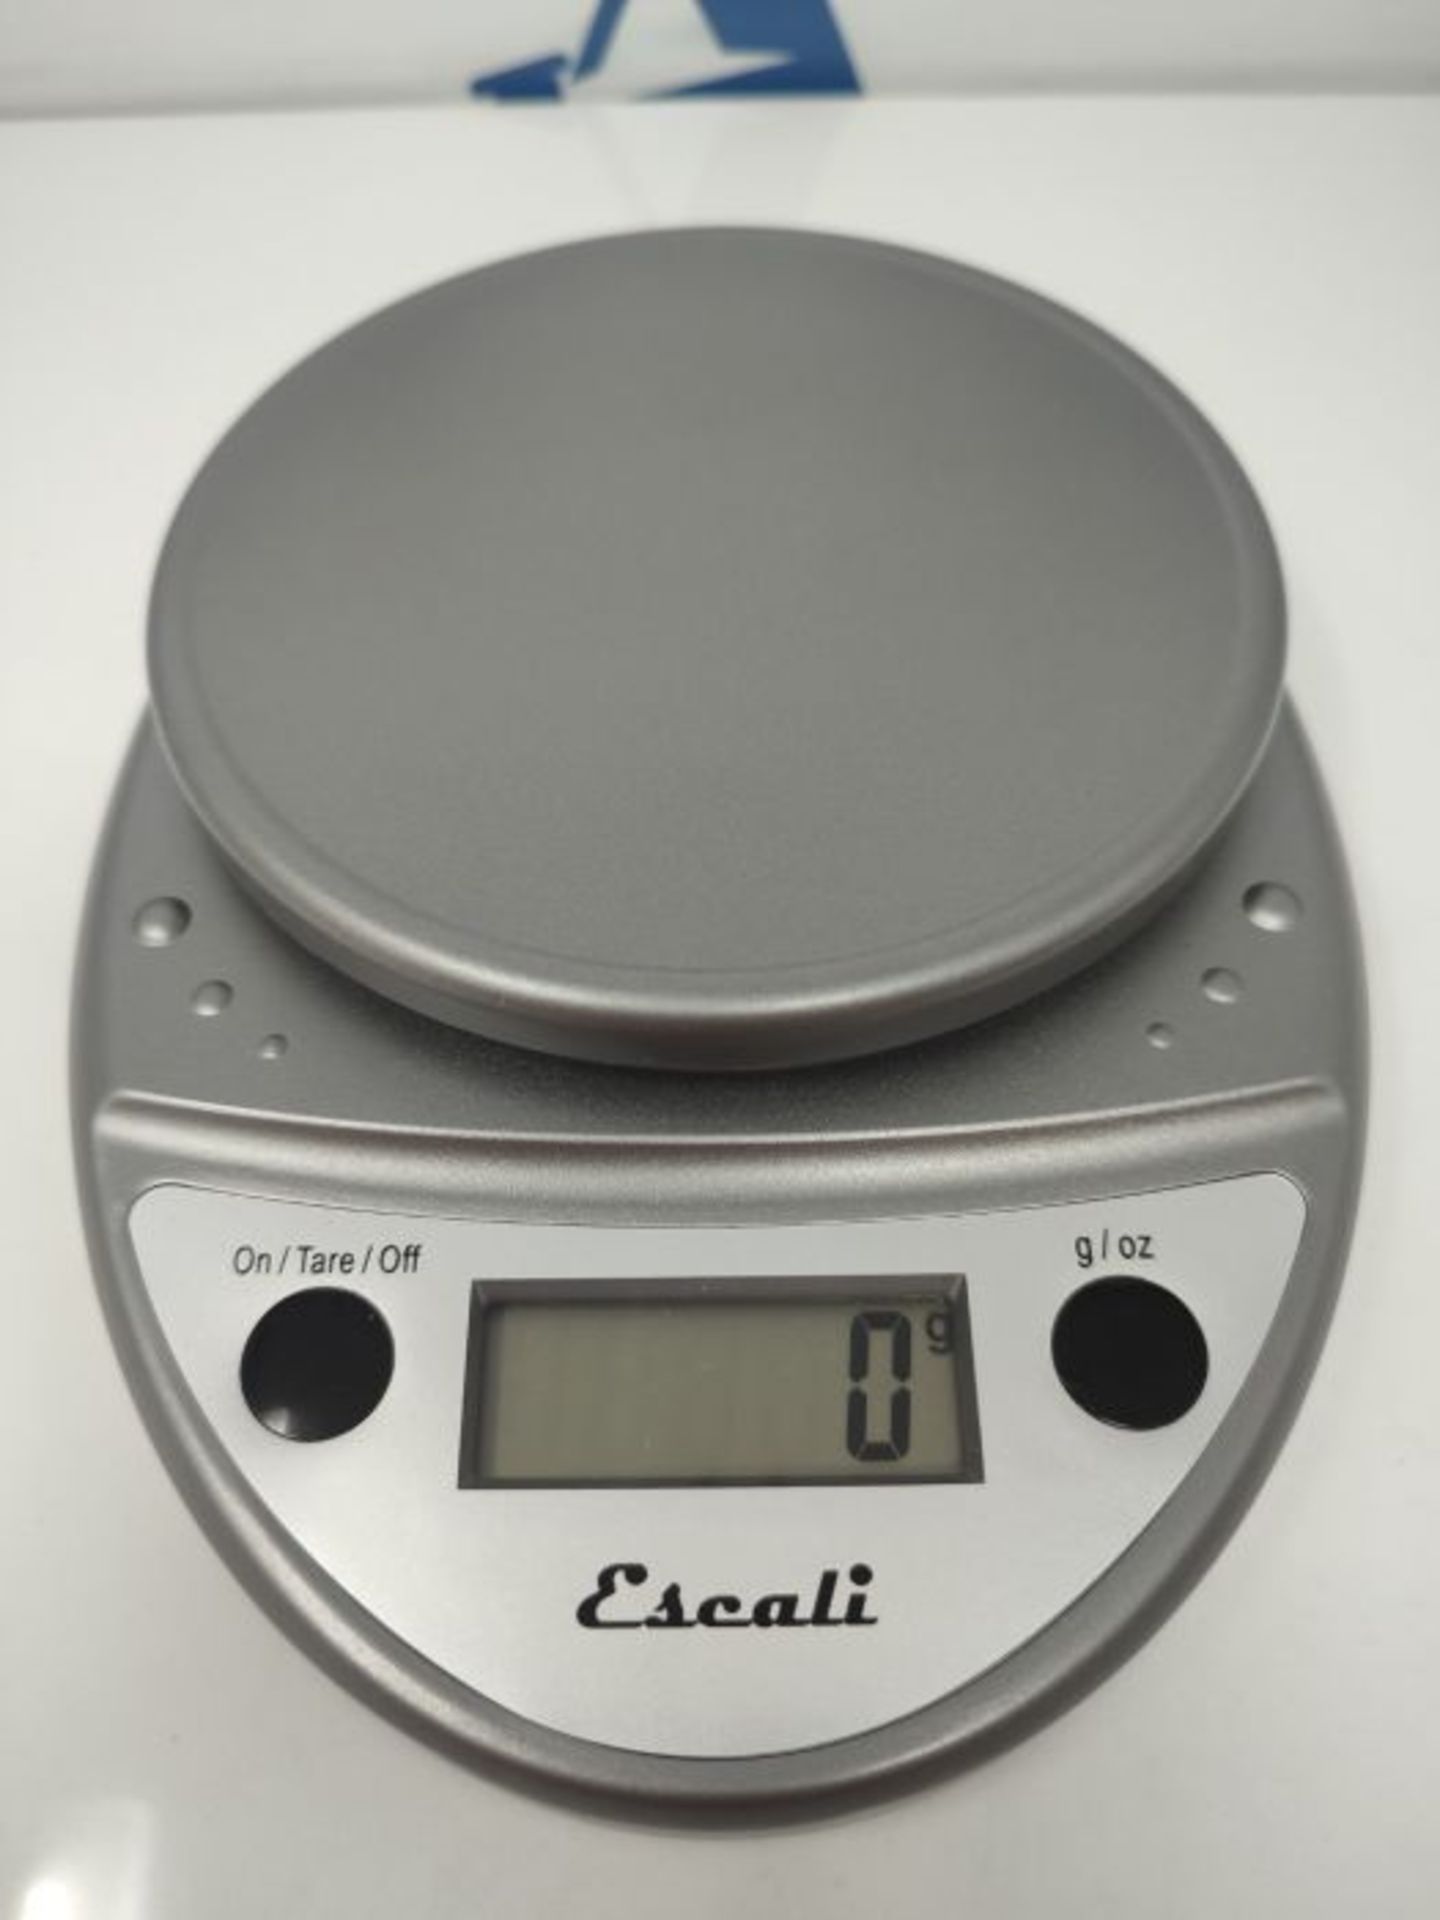 Escali Primo P115M Precision Kitchen Food Scale for Baking and Cooking, Lightweight an - Image 3 of 5